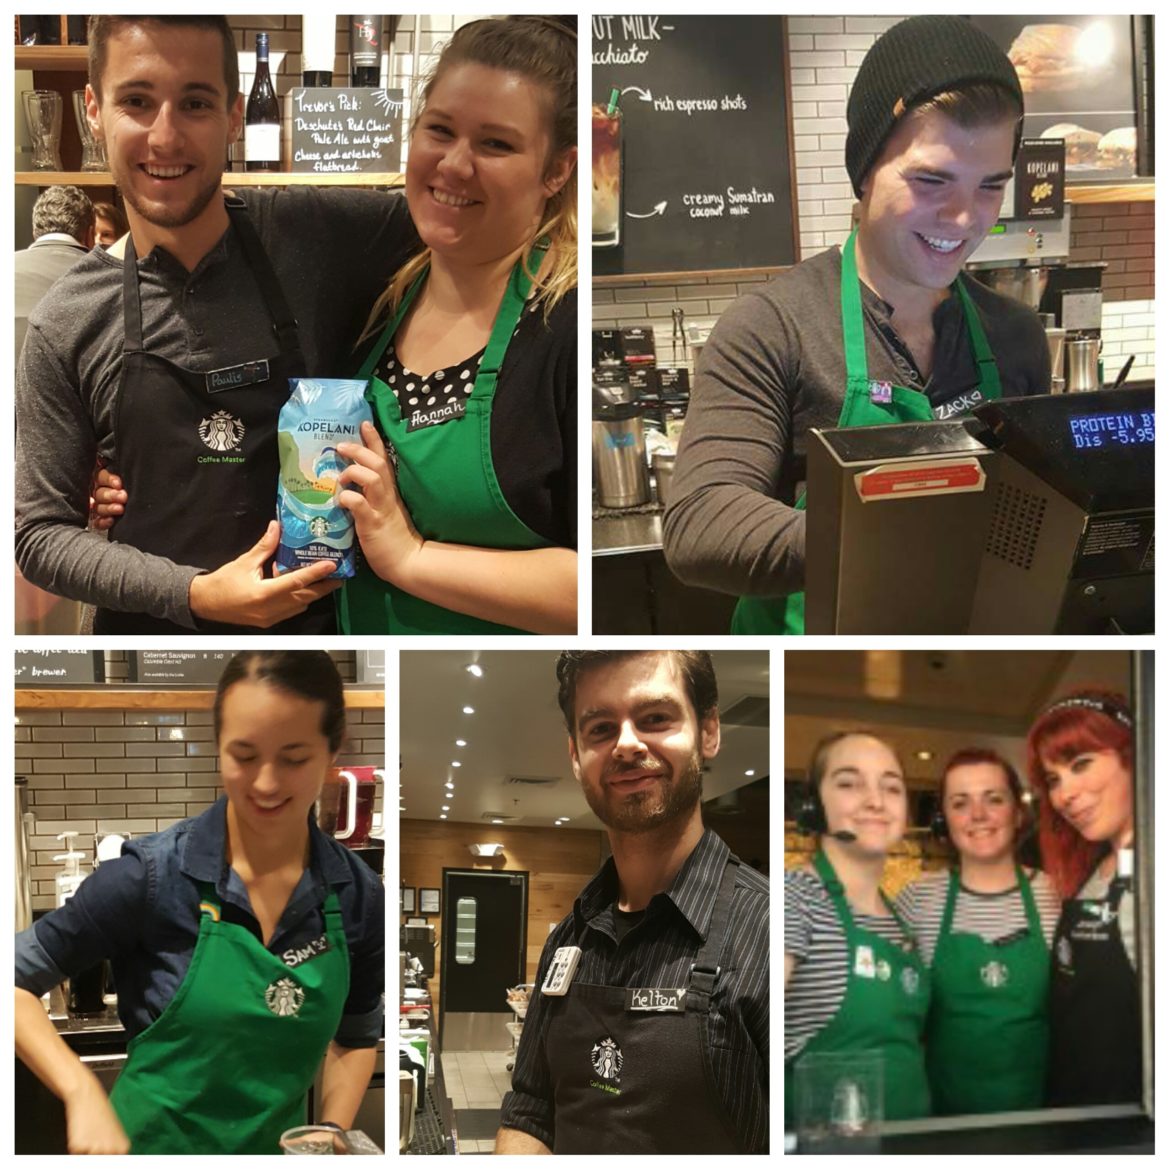 Another look at the new Starbucks dress code.